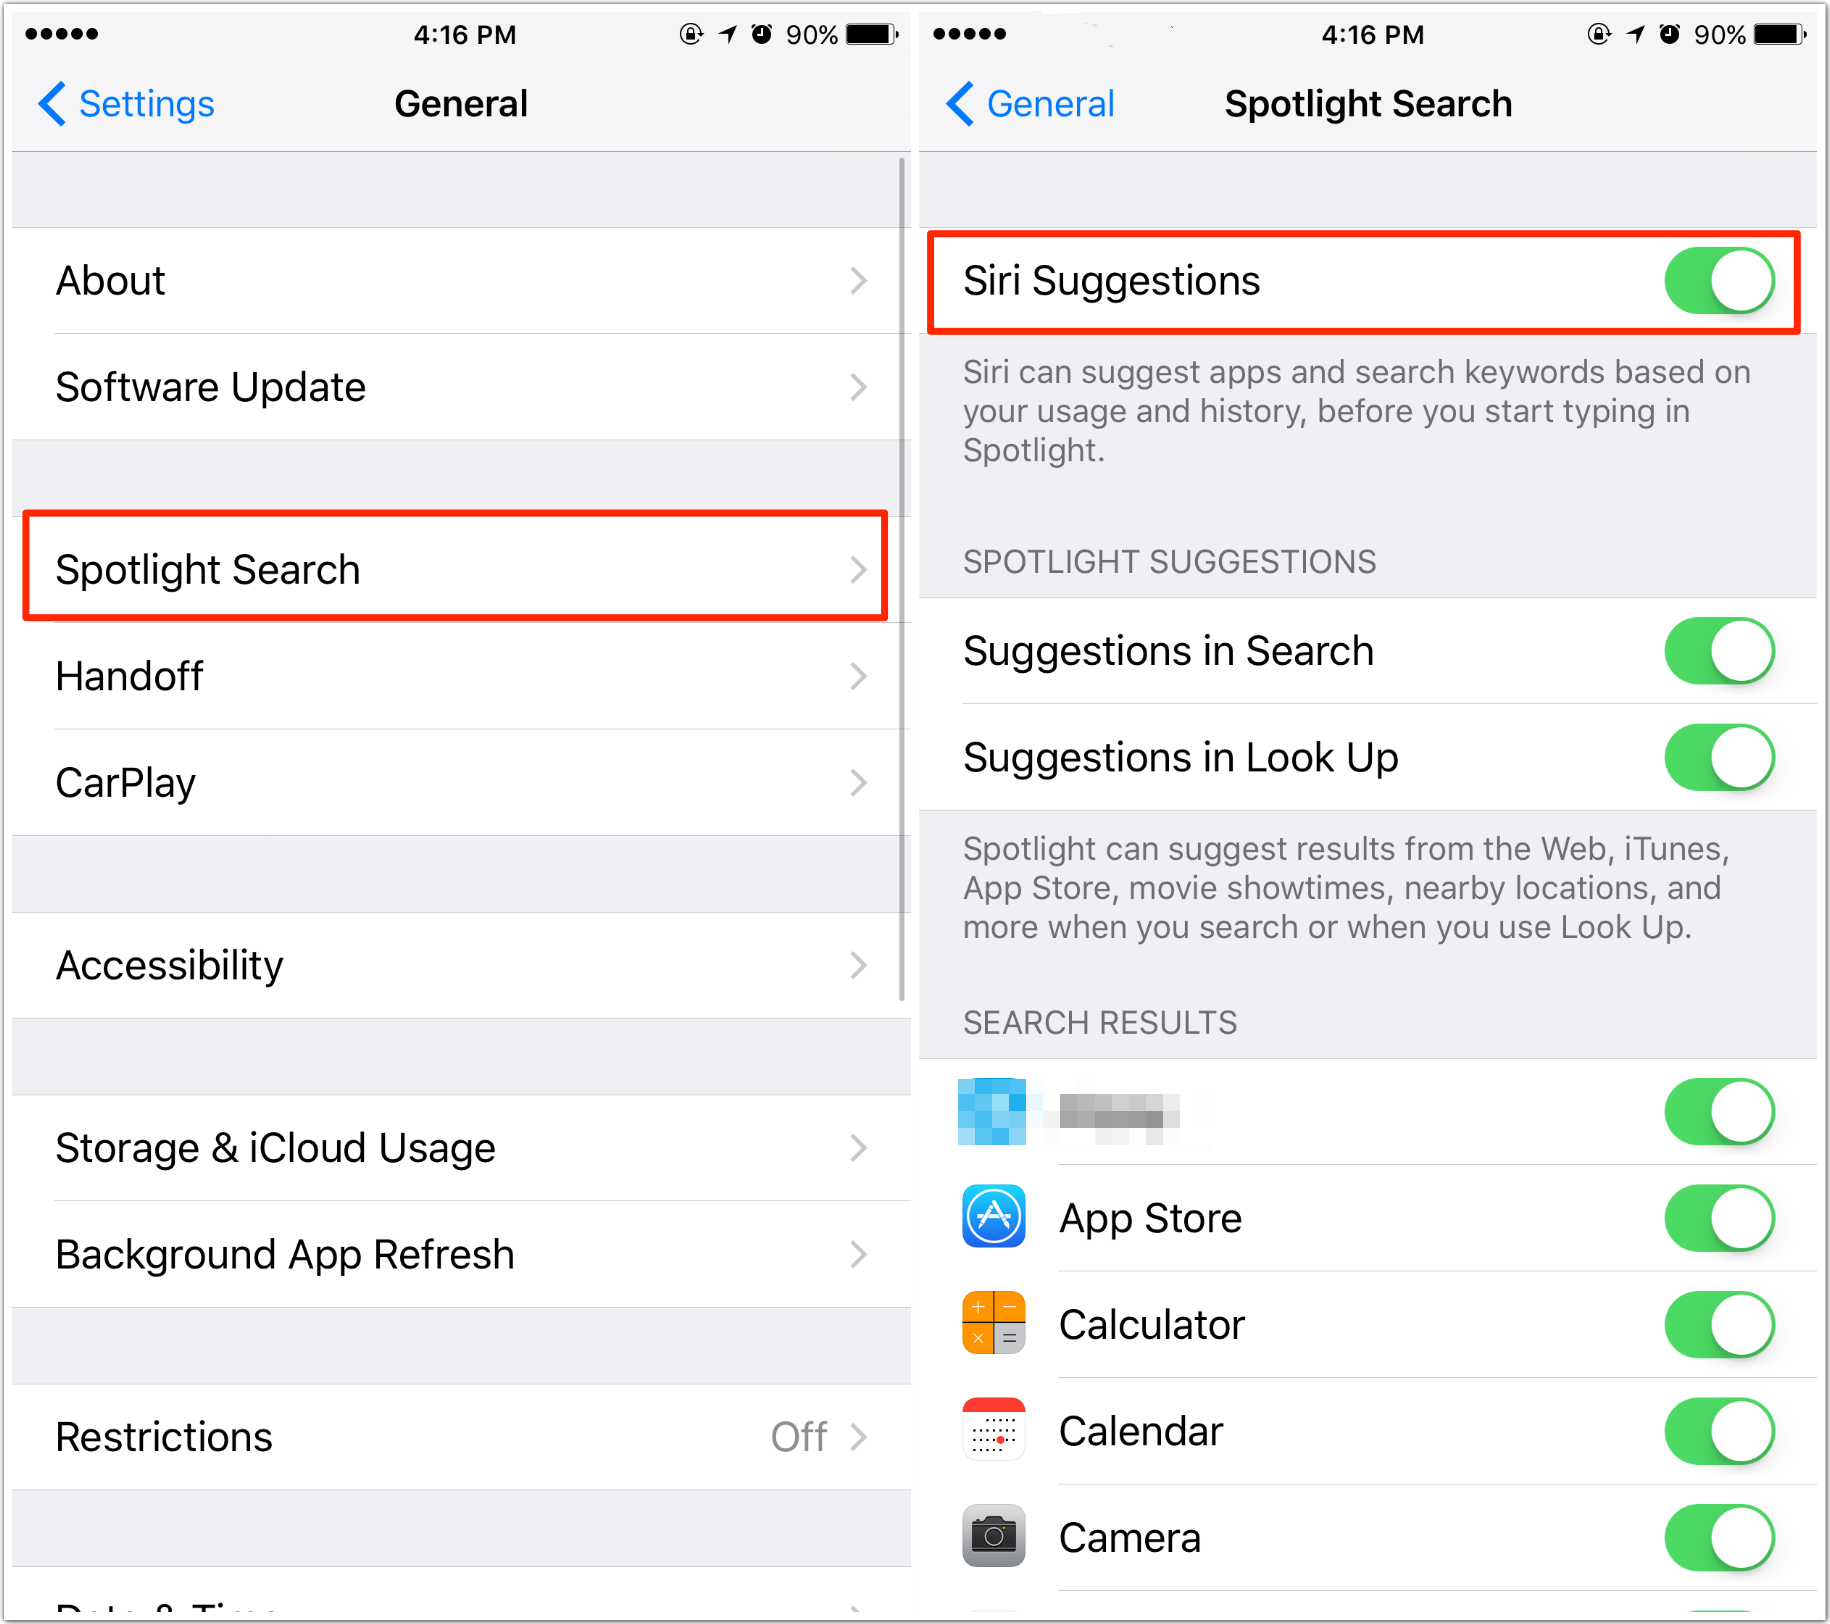 How to disable Siri Suggestions in Spotlight Search on iPhone and iPad